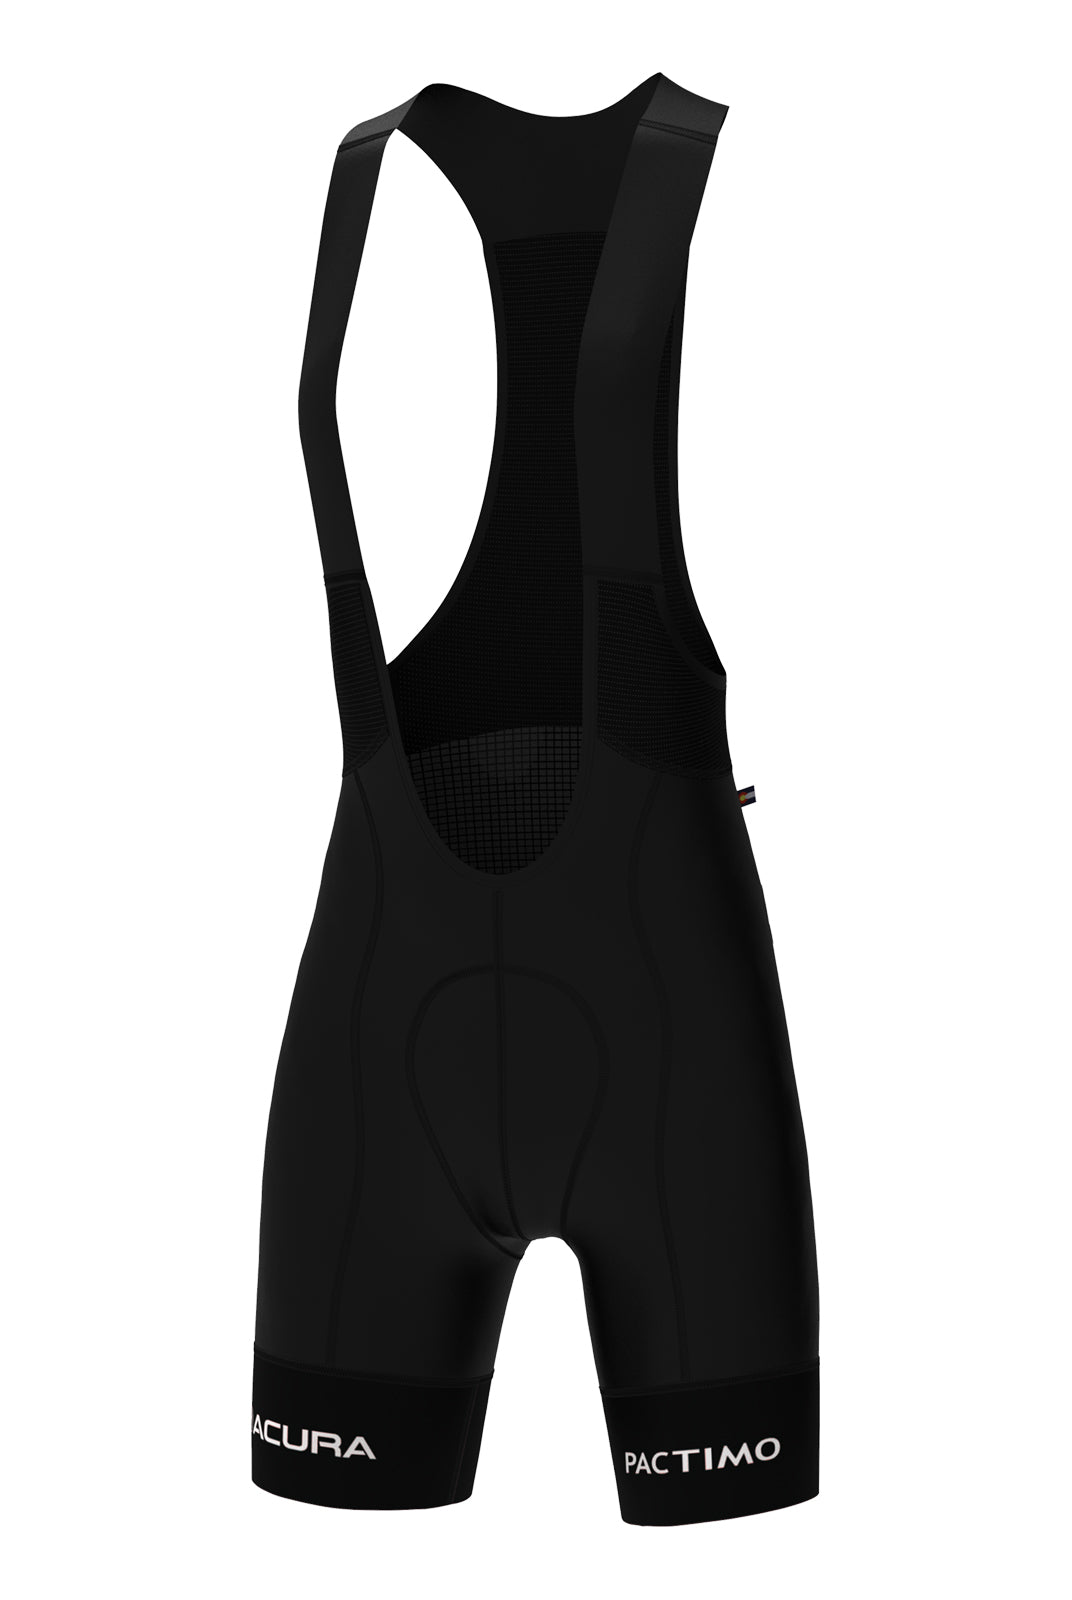 Women's Human Powered Health Long Length Cycling Bibs - Ascent Front View